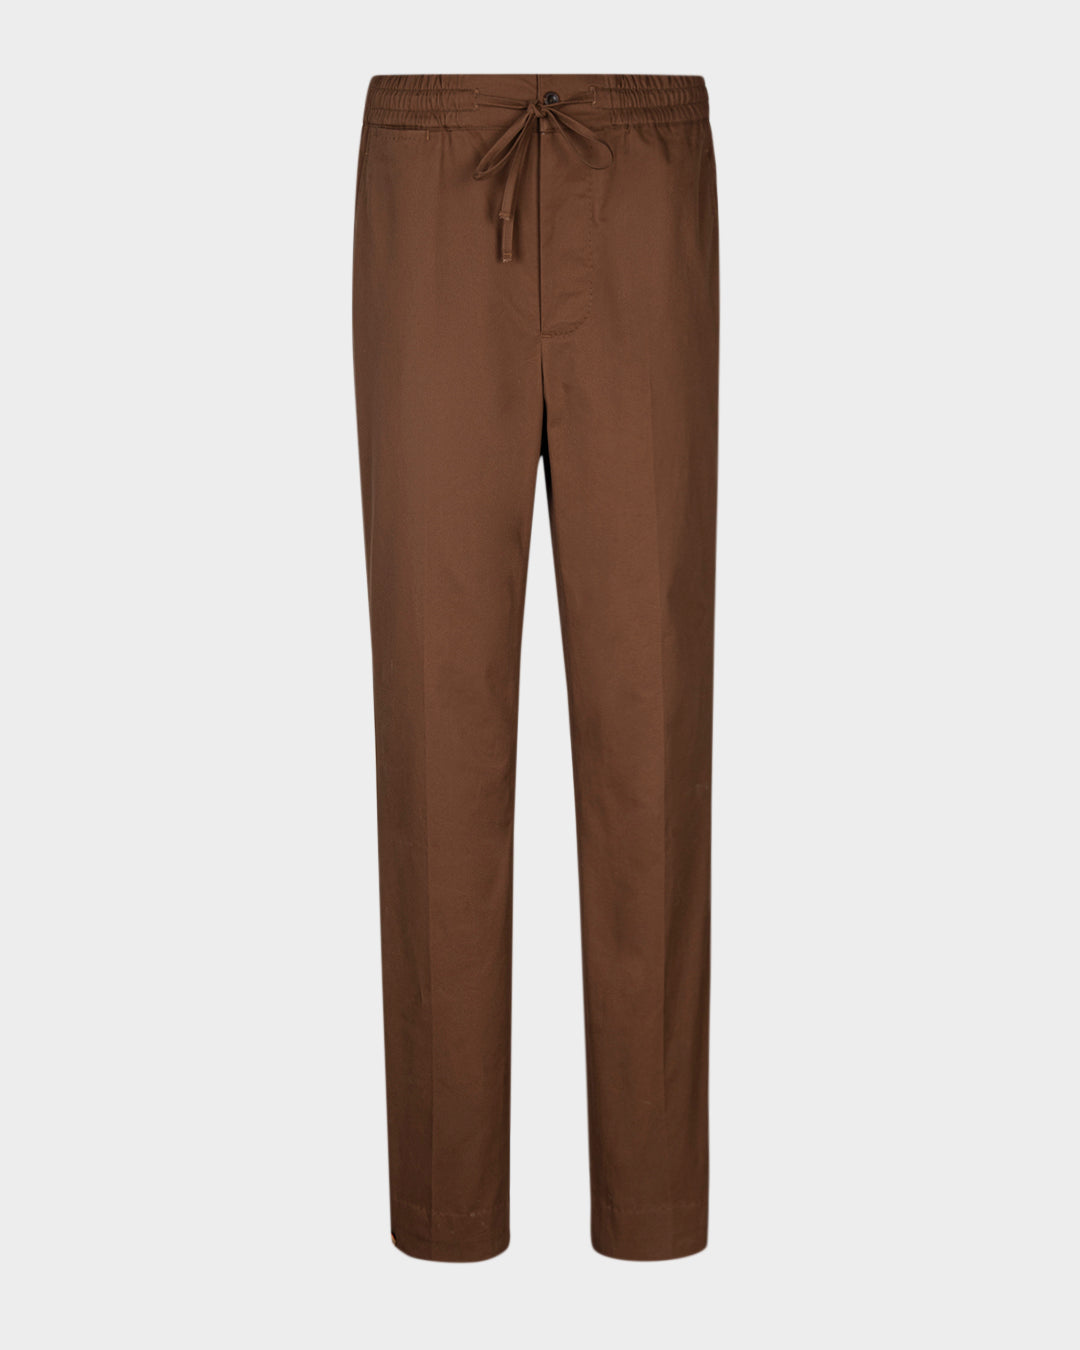 Front view of custom Genoa drawstring pants for men by Luxire in coffee brown